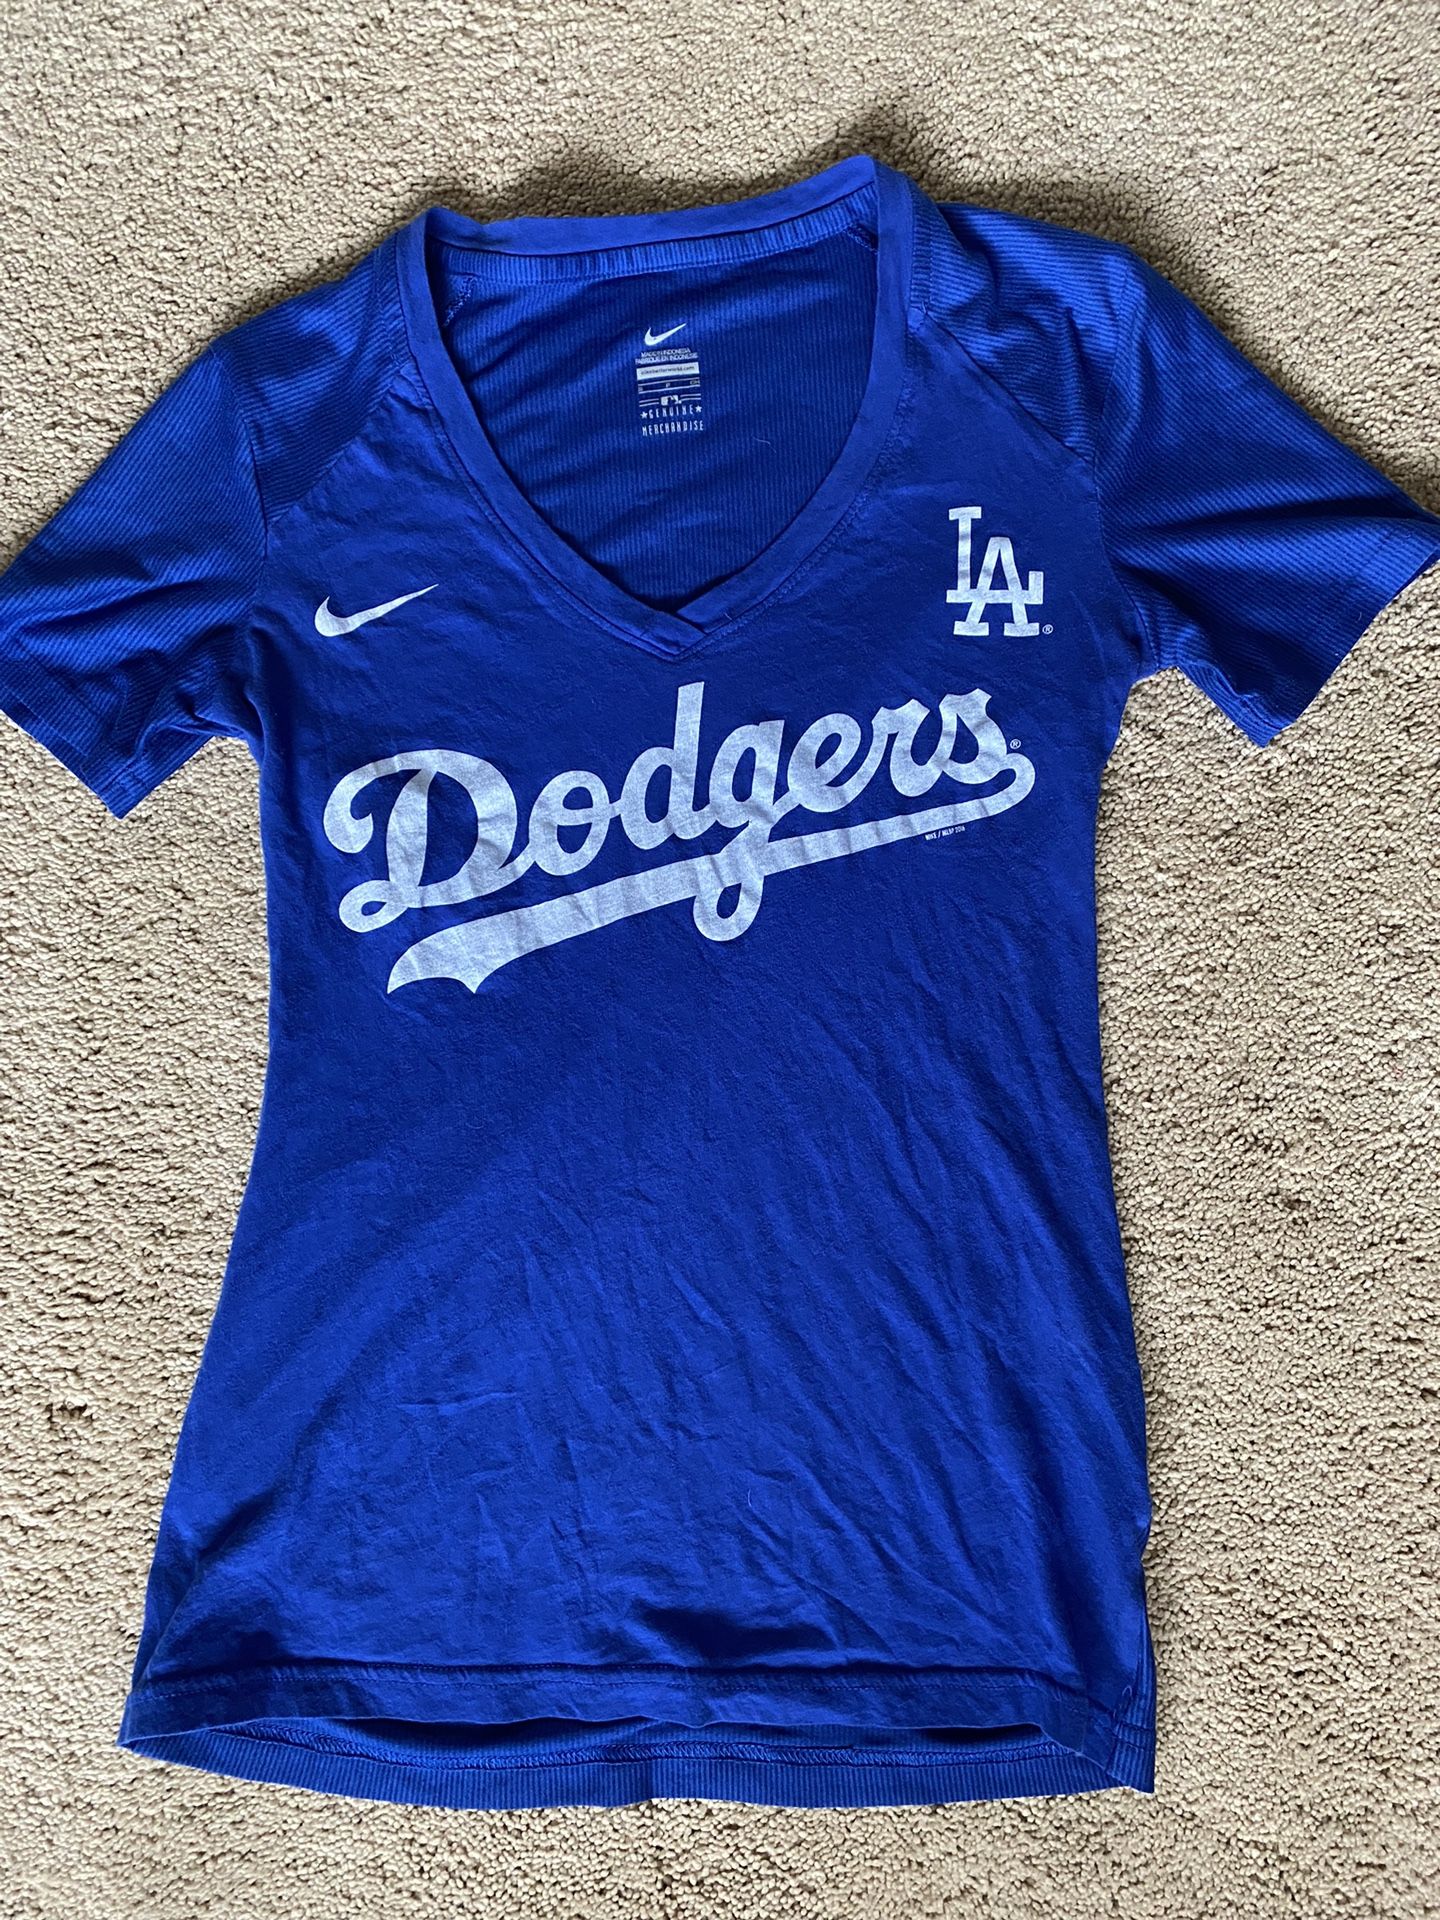 Nike Women's Dodger Shirt Size Small for Sale in Ventura, CA - OfferUp